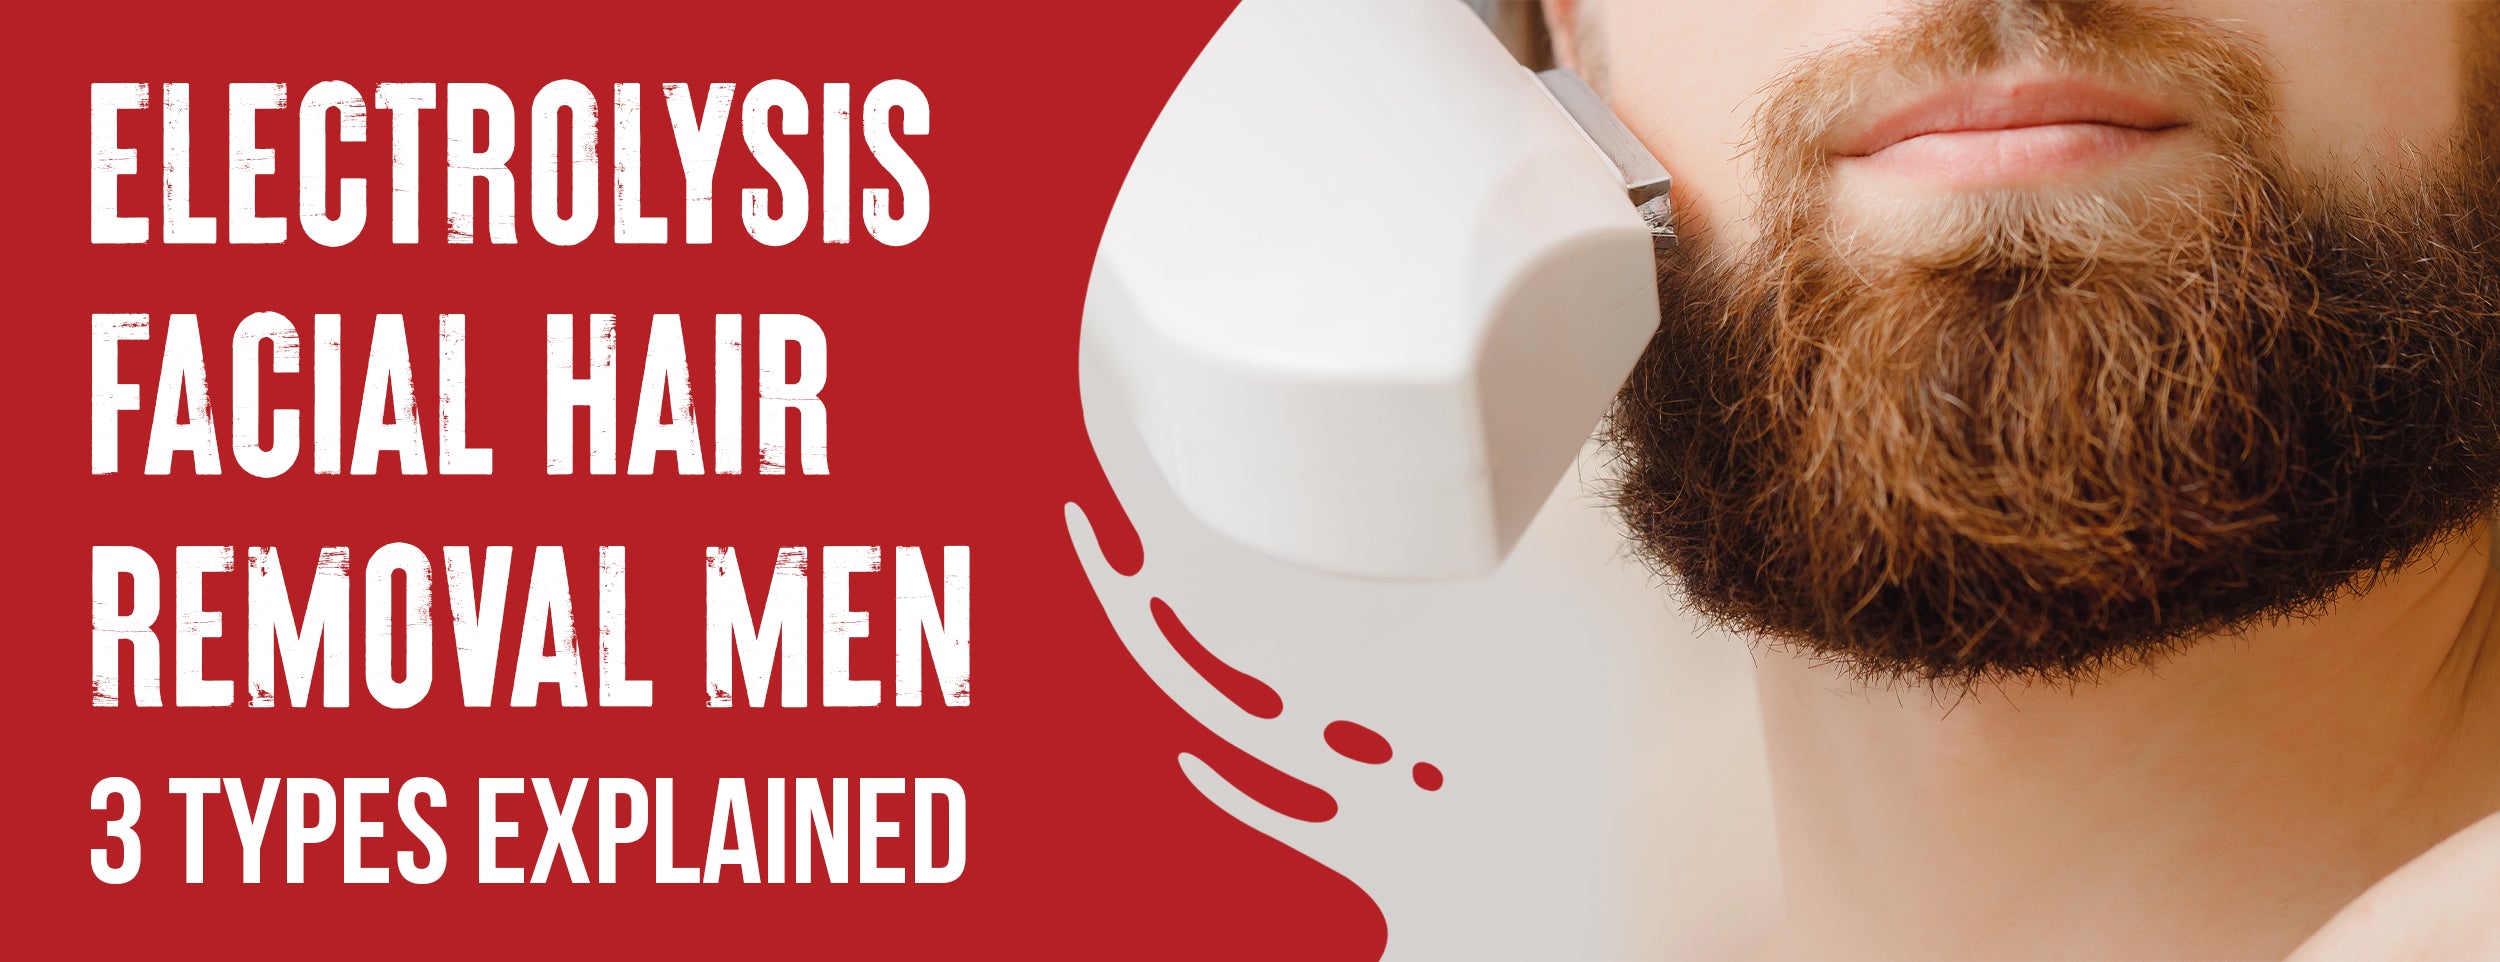 Using electrolysis for the removal of facial hair in men